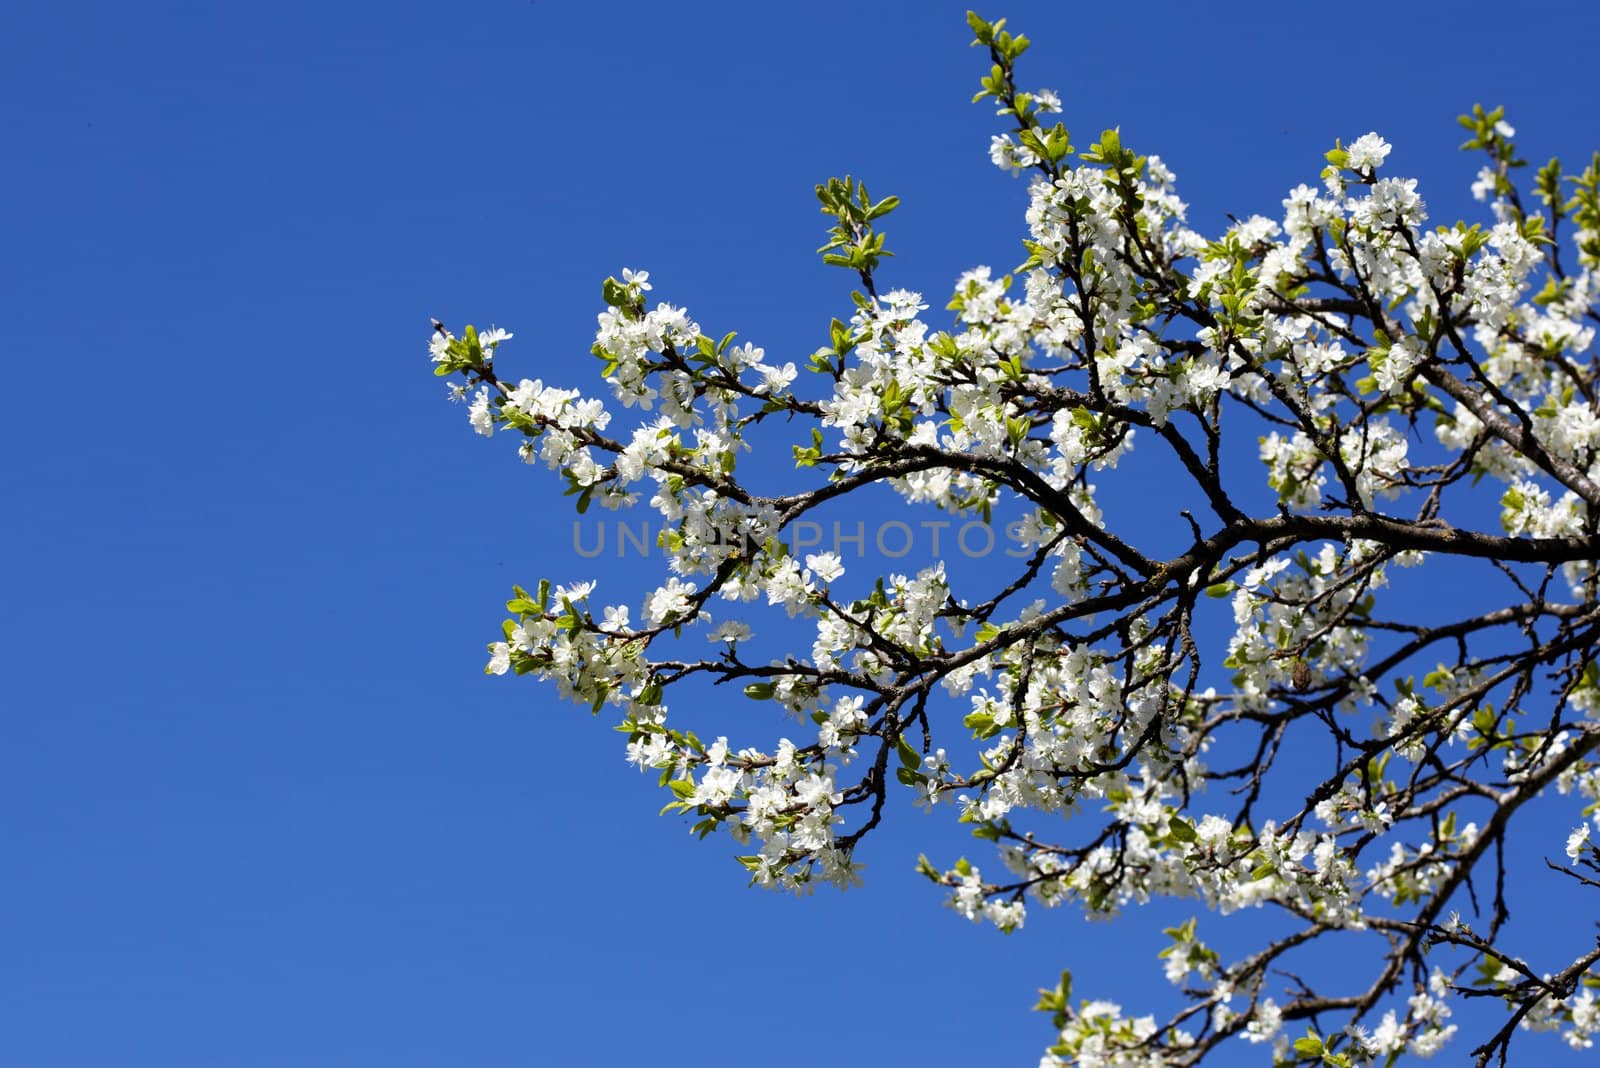 Blooming garden trees over a blue sky background